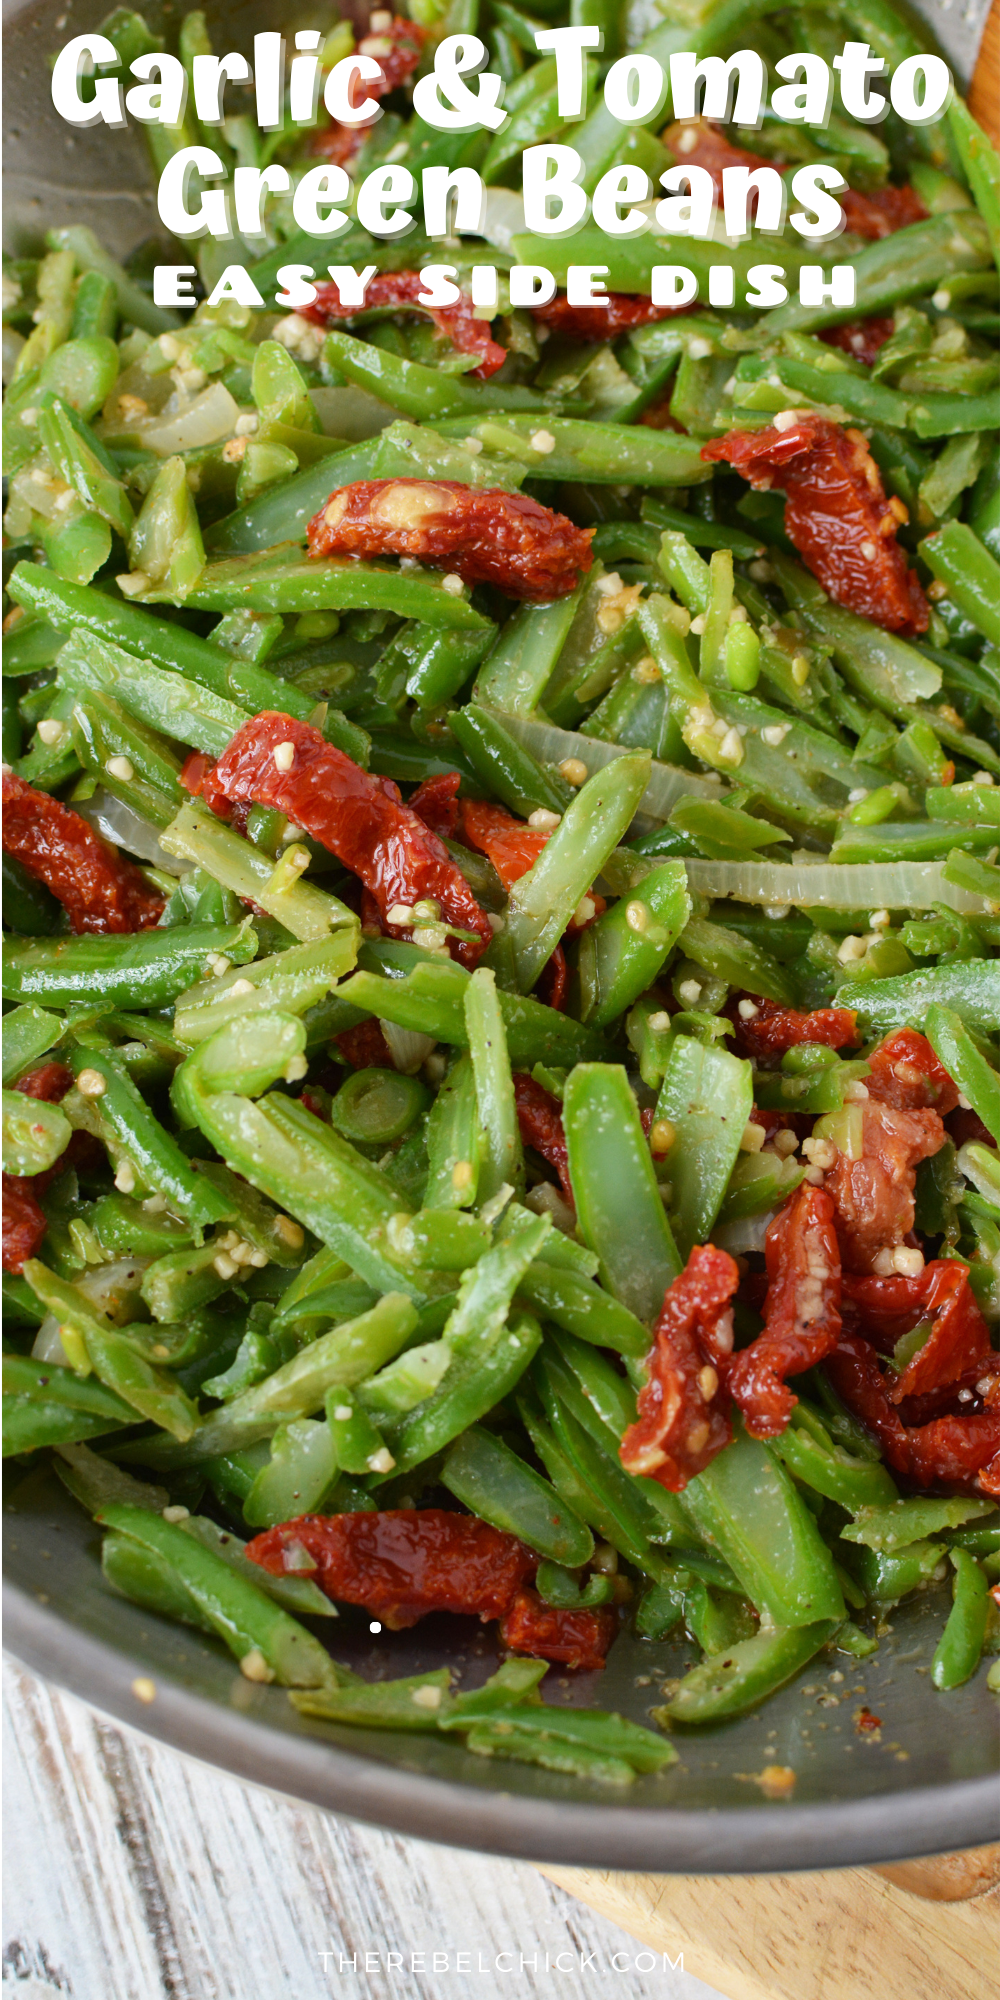 green beans, garlic, onions and tomatoes in a frying pan